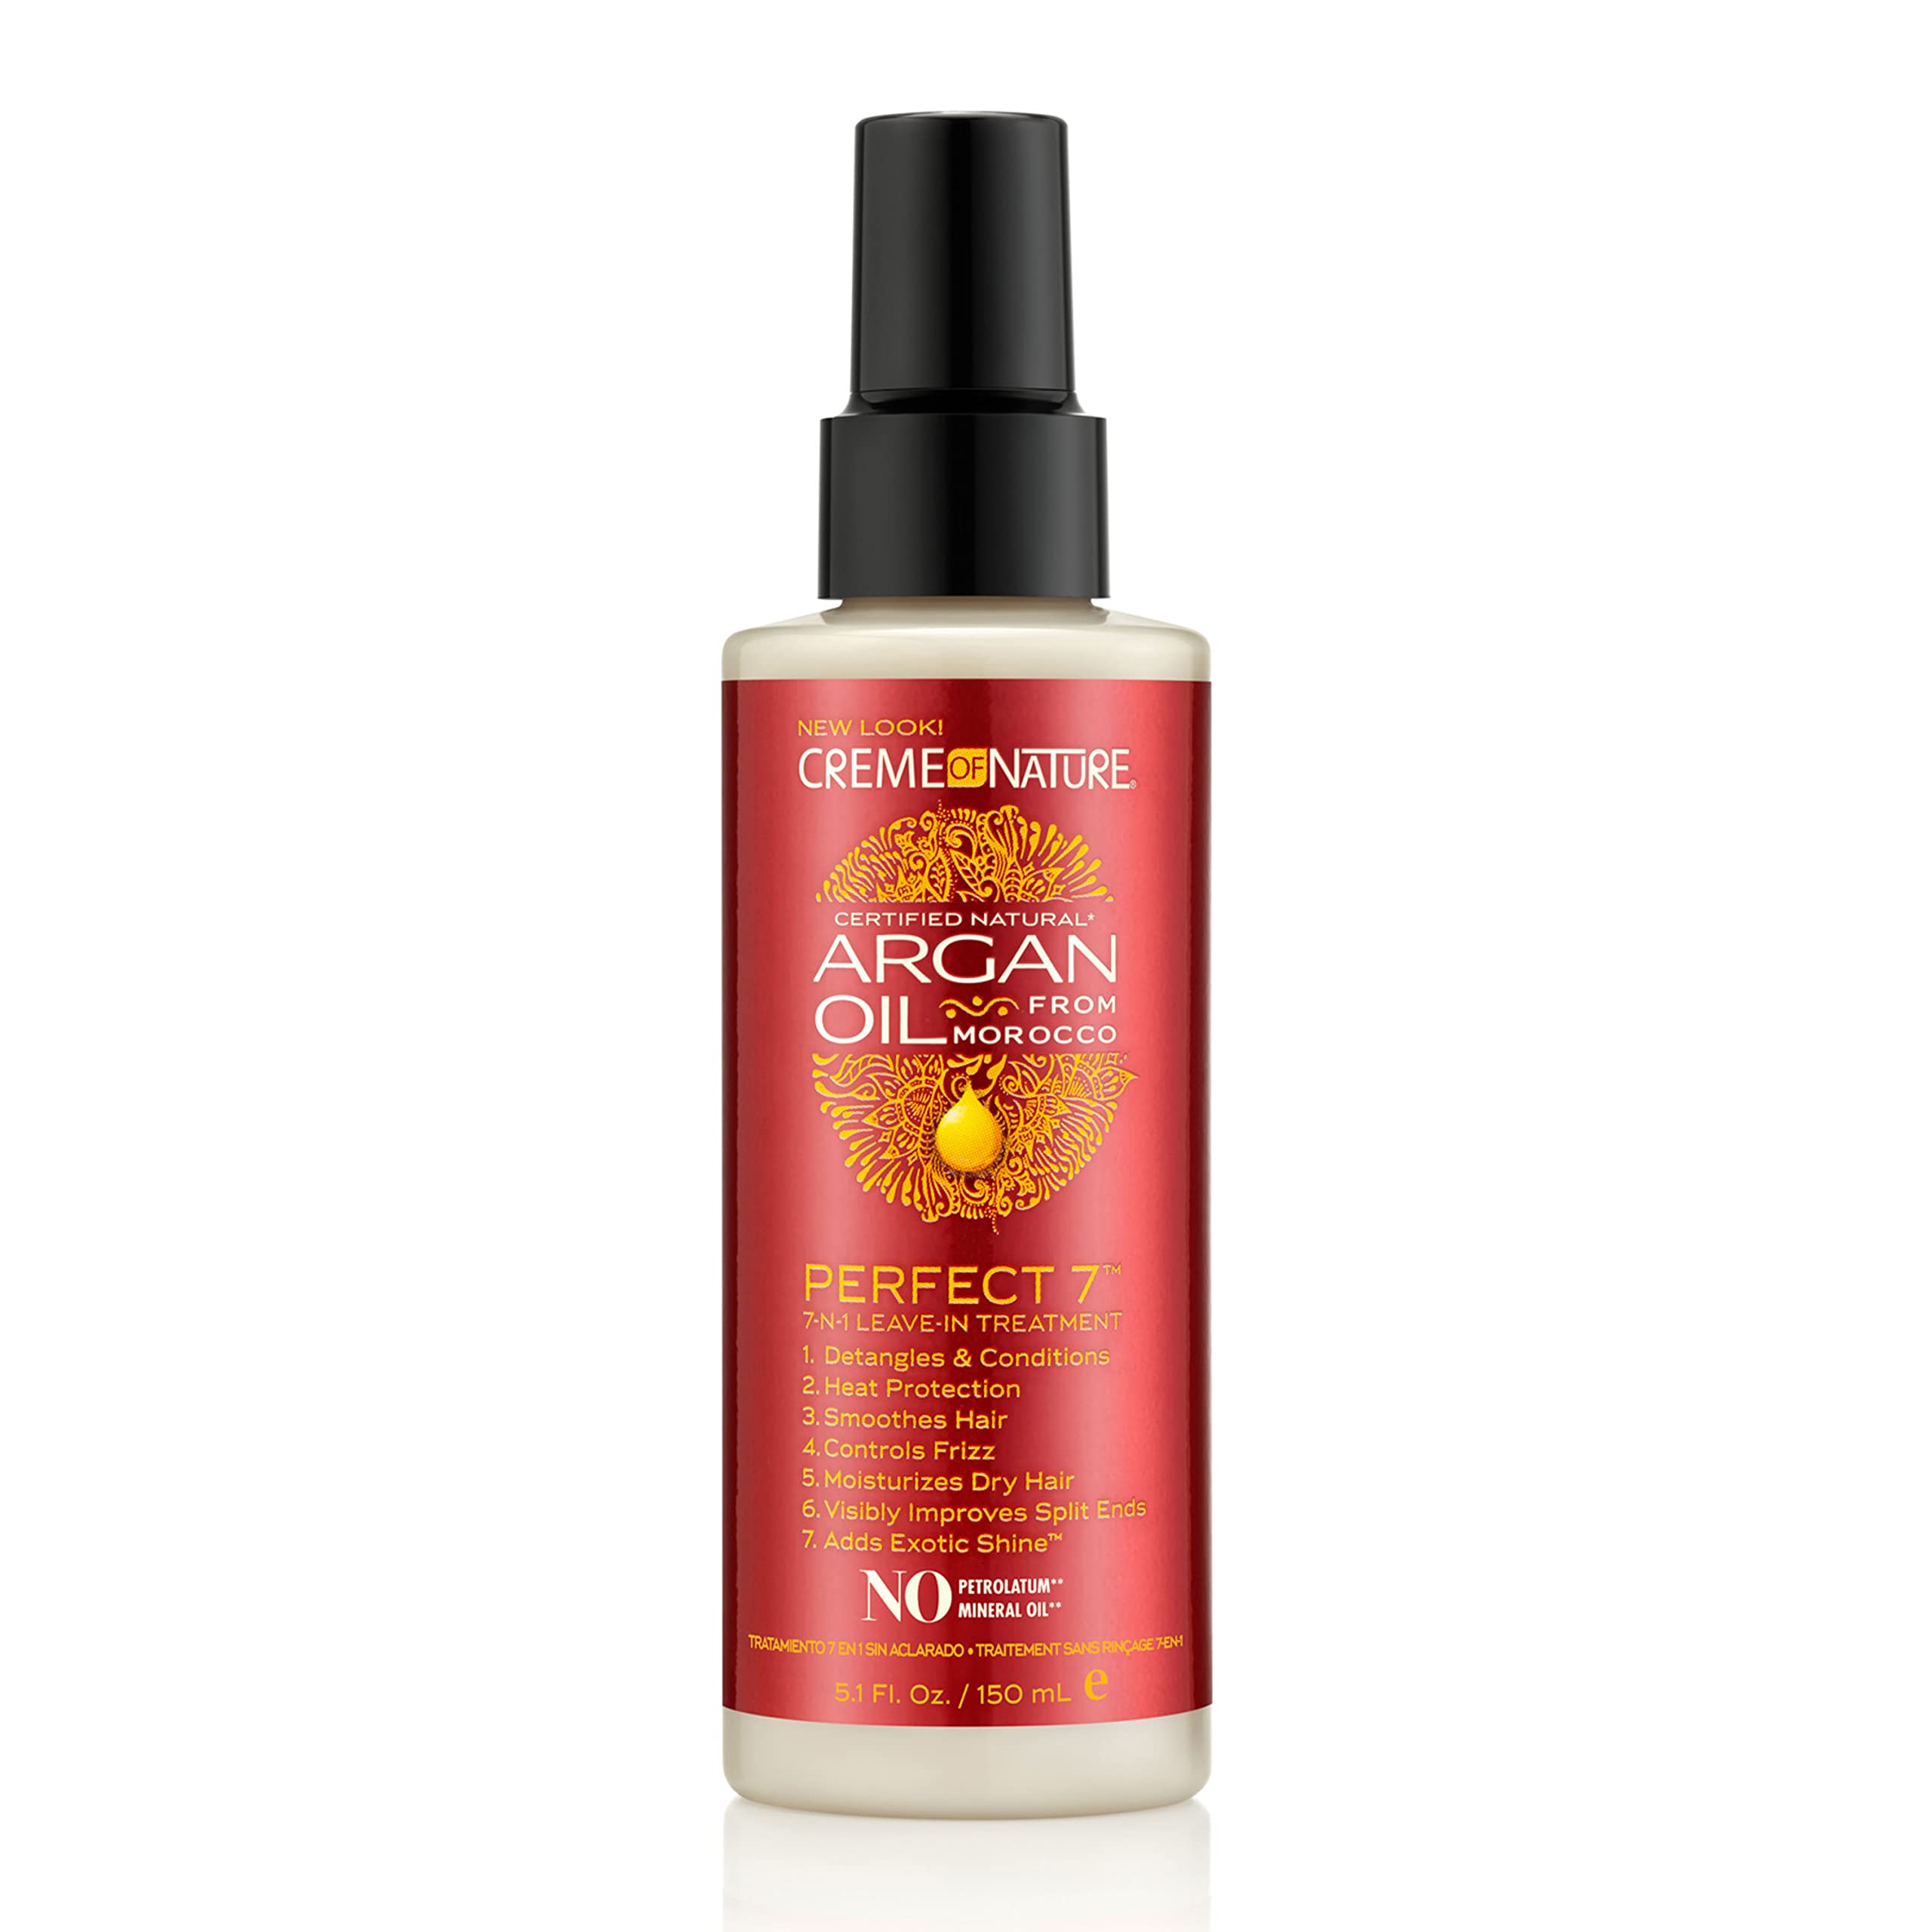 Argan Oil for Hair, Perfect 7-in-1 Leave-in Treatment by Creme of Nature, for Healthy Hair with Exotic Shine, 5.1 Fl Oz (Package May Vary)